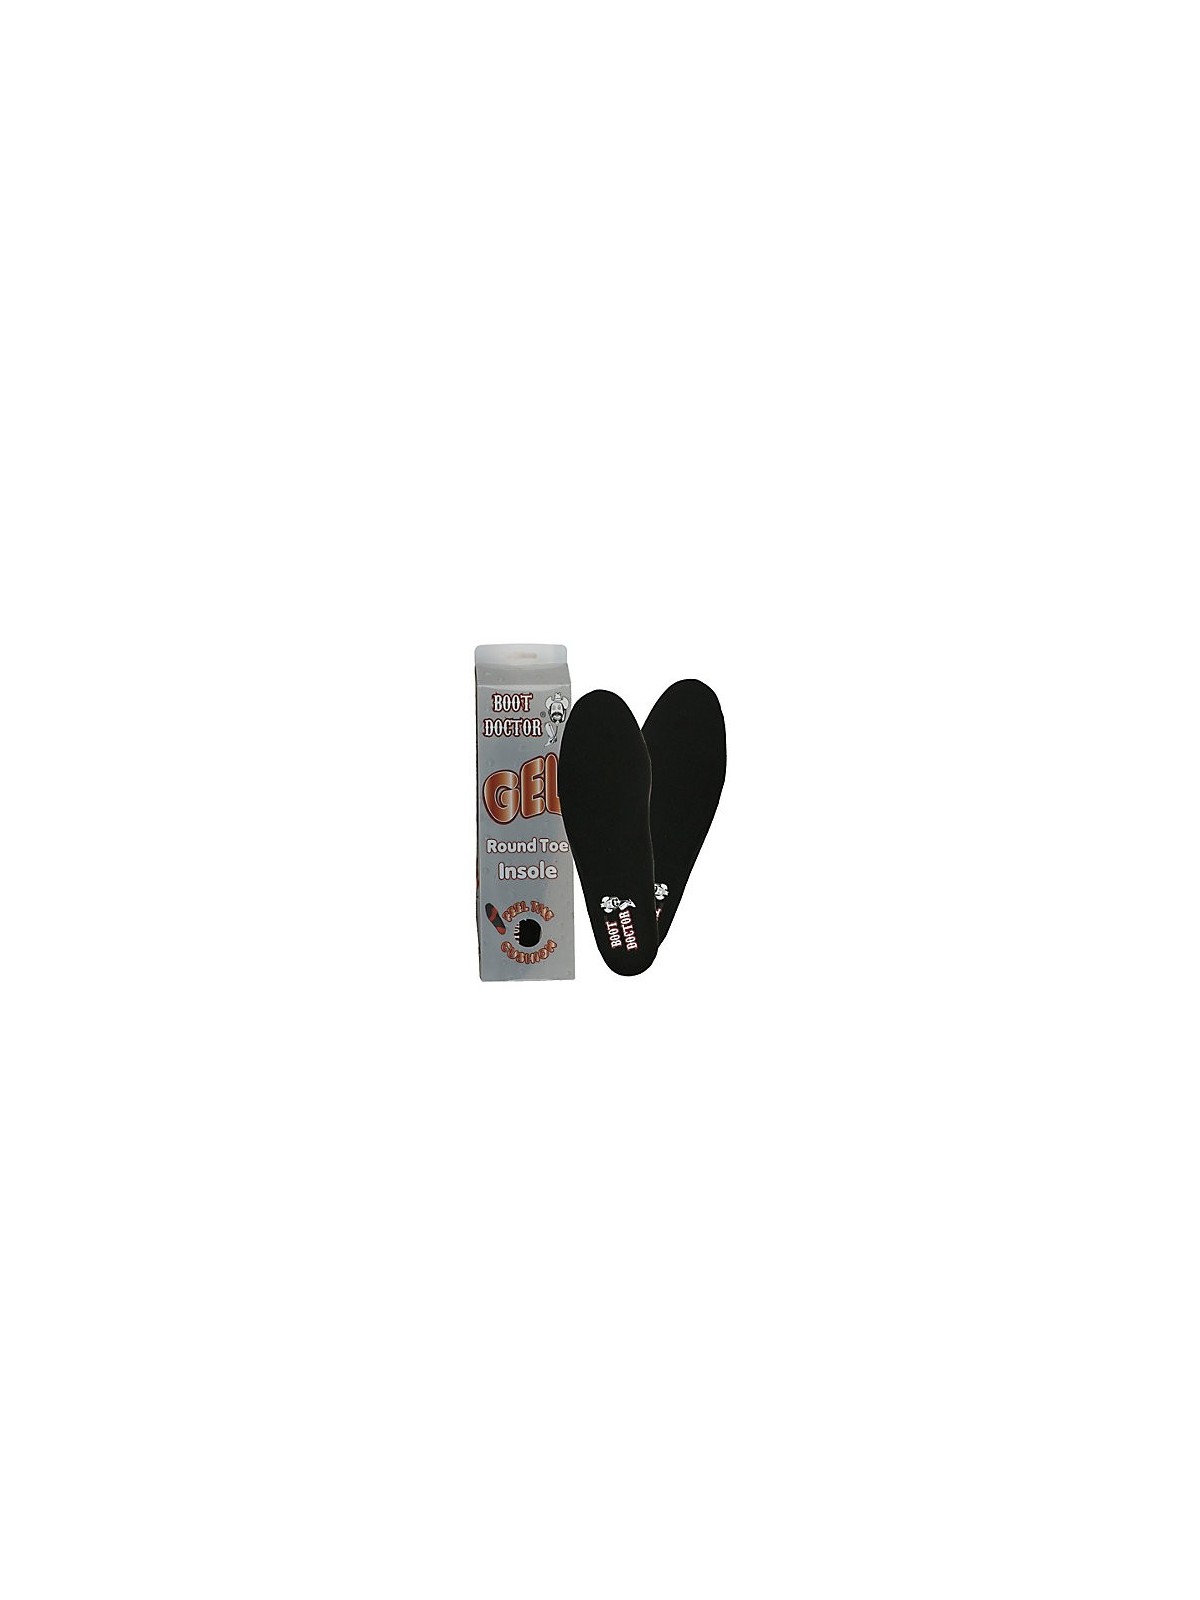 Boot Doctor Gel Insole - Round Toe